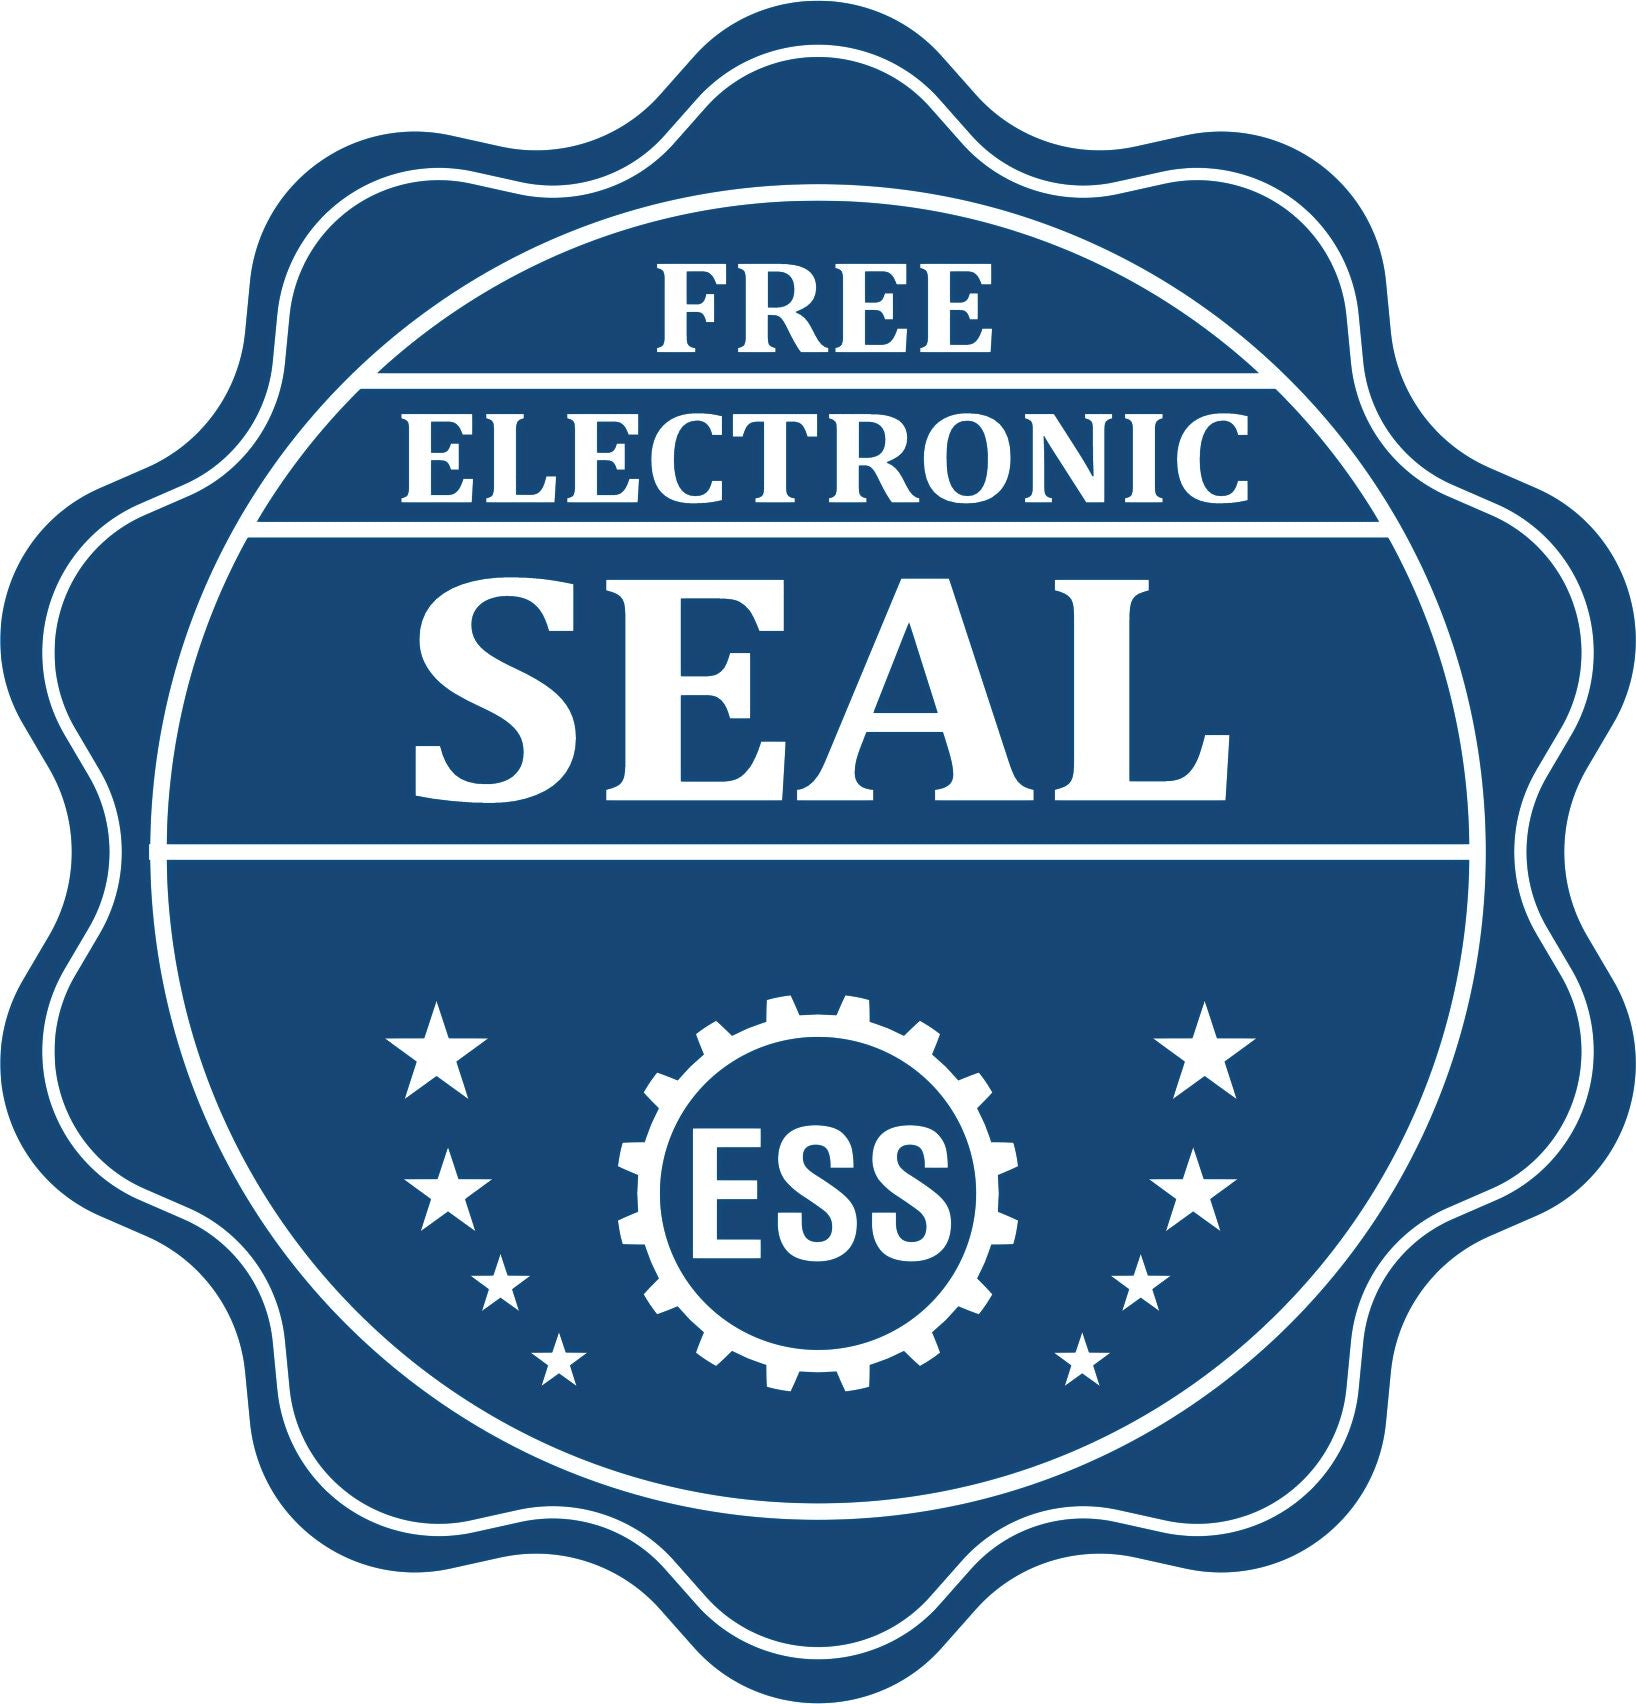 A badge showing a free electronic seal for the Extended Long Reach Kansas Surveyor Embosser with stars and the ESS gear on the emblem.